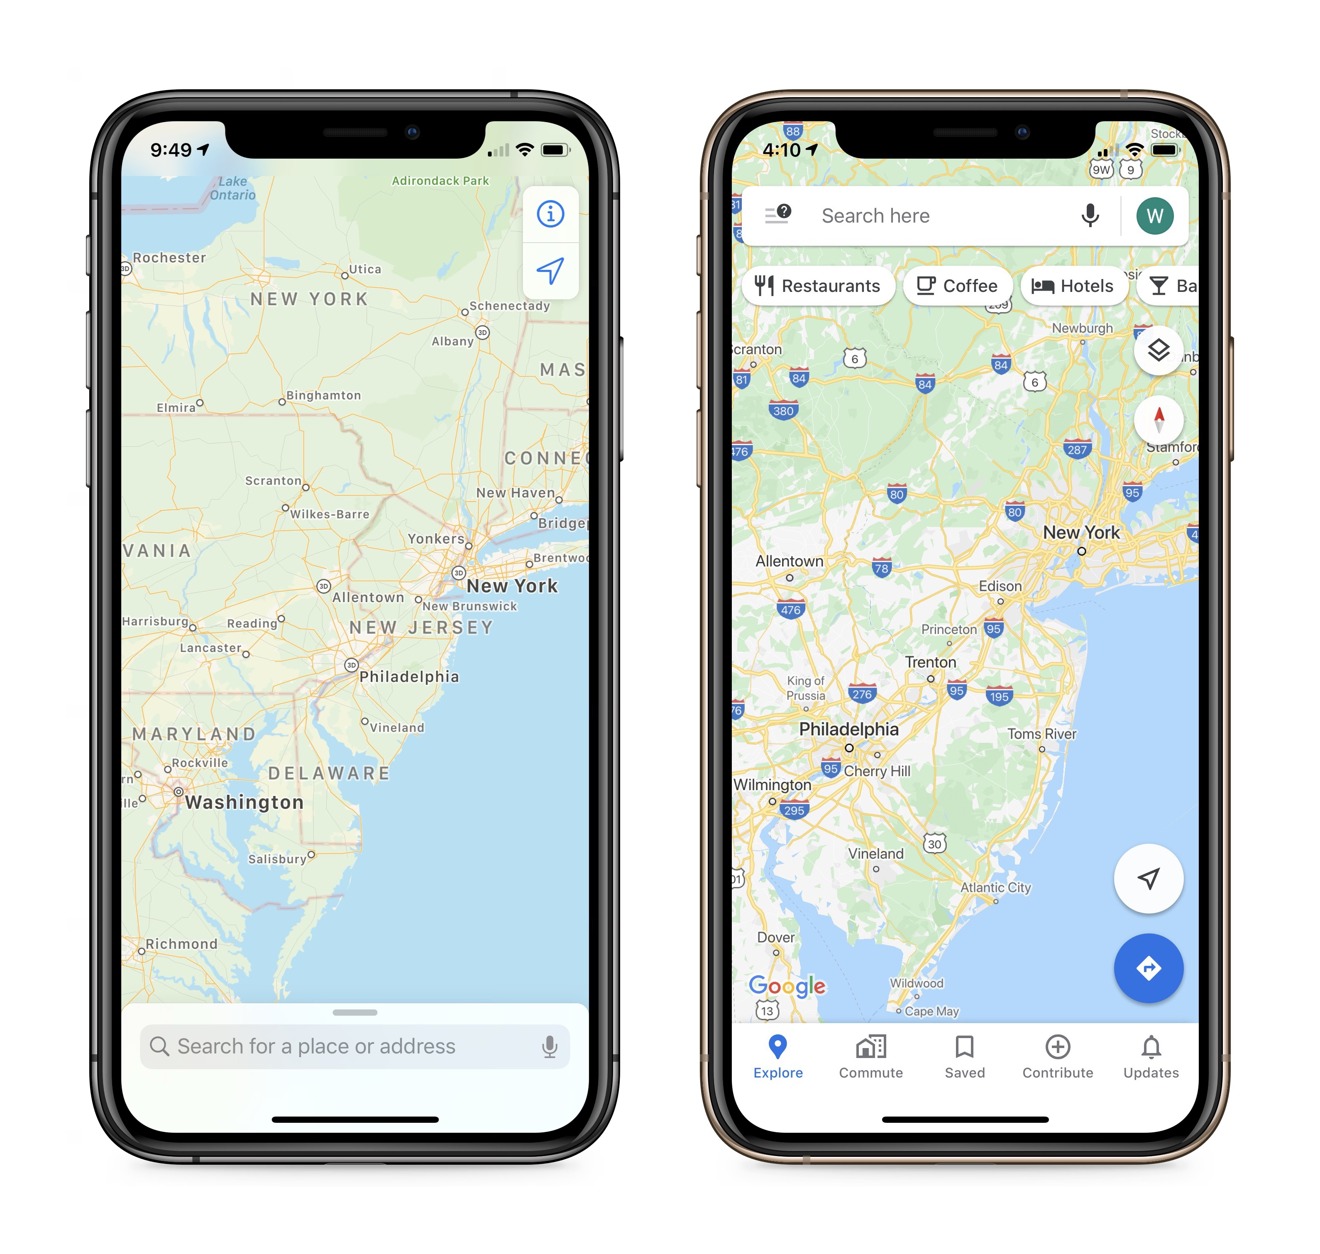 Apple Maps versus Google Maps - which is the best for your iPhone